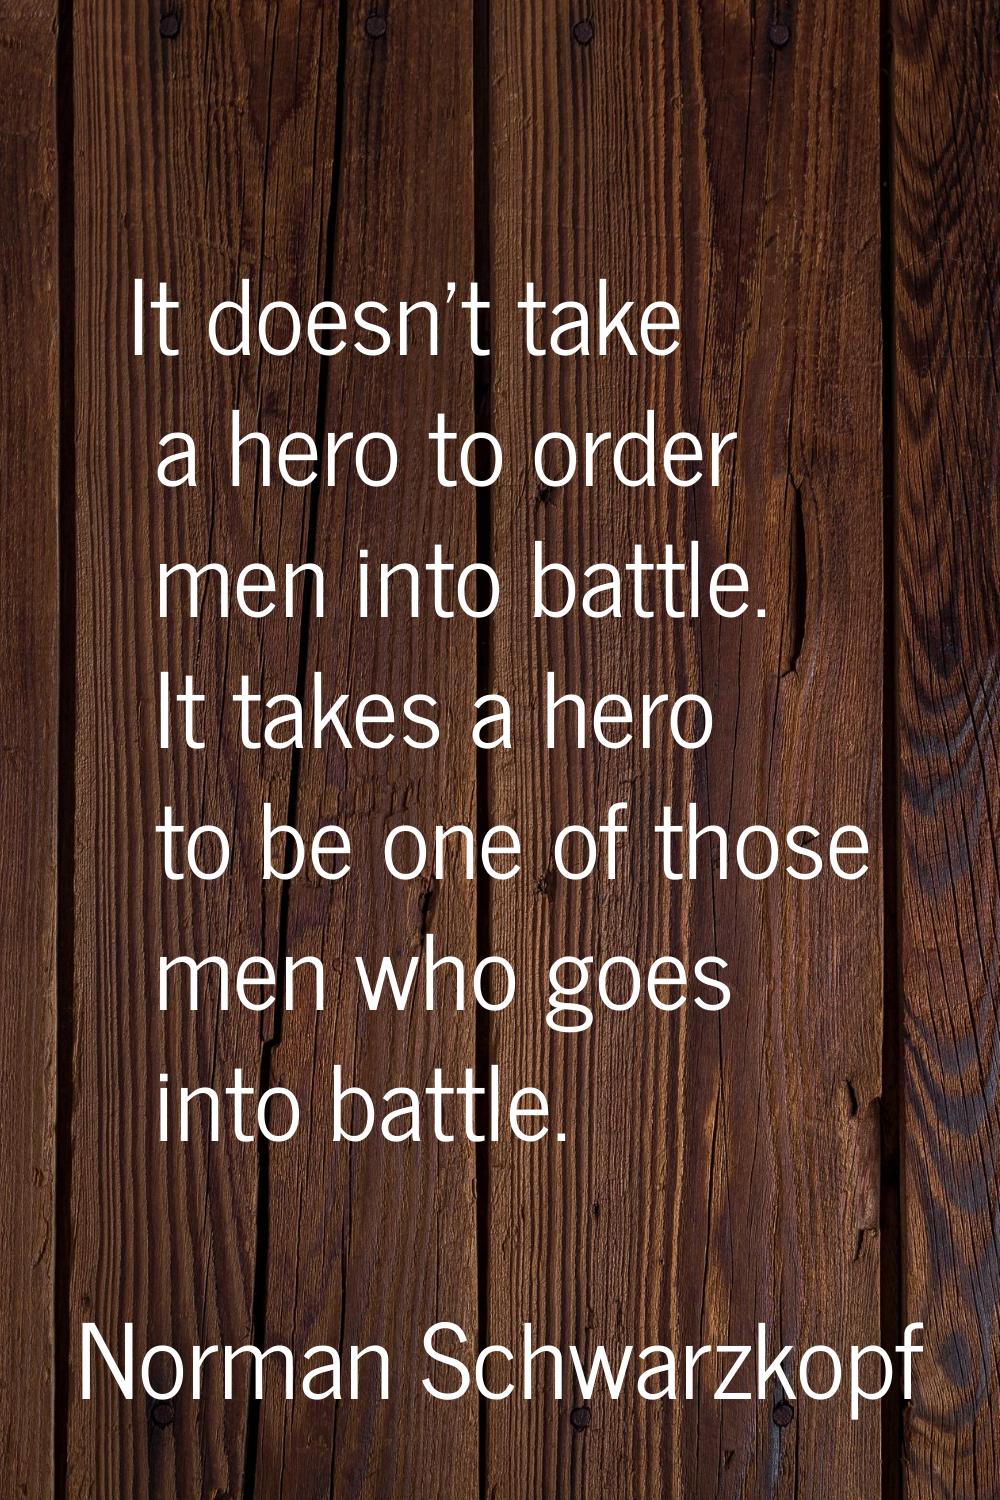 It doesn't take a hero to order men into battle. It takes a hero to be one of those men who goes in